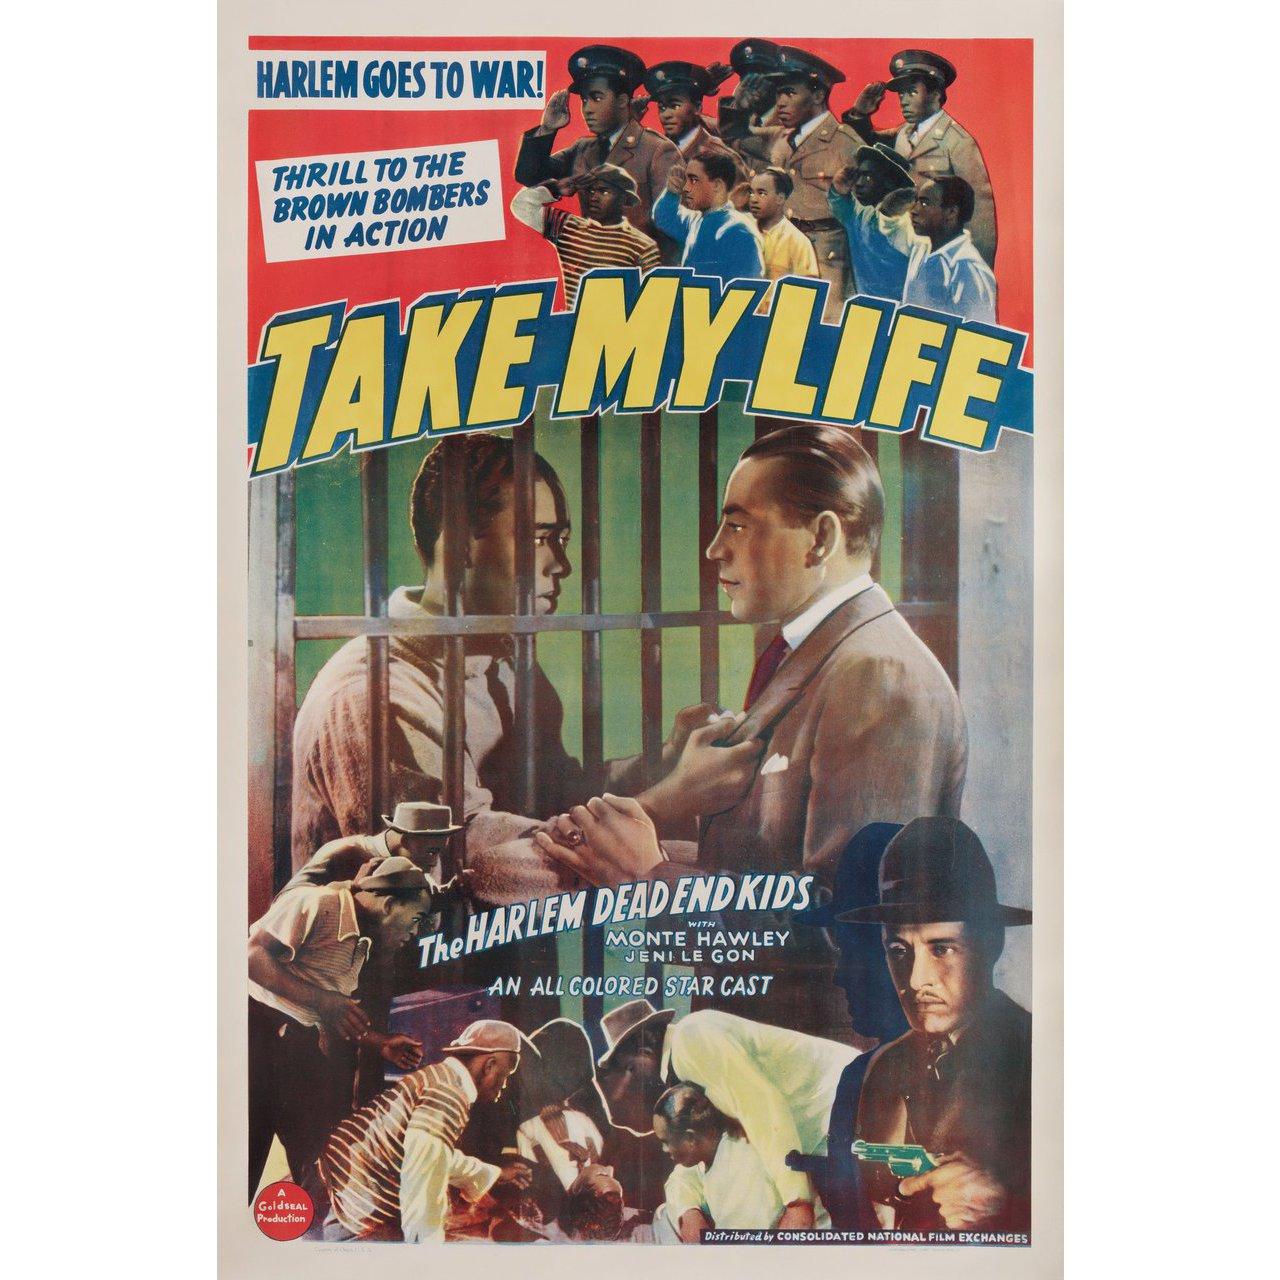 Original 1941 U.S. one sheet poster for the film Take My Life (Murder Rap) directed by Harry M. Popkin with Monte Hawley / Jeni Le Gon / The Harlem Tuff-Kids. Very Good-Fine condition, linen-backed. This poster has been professionally linen-backed.